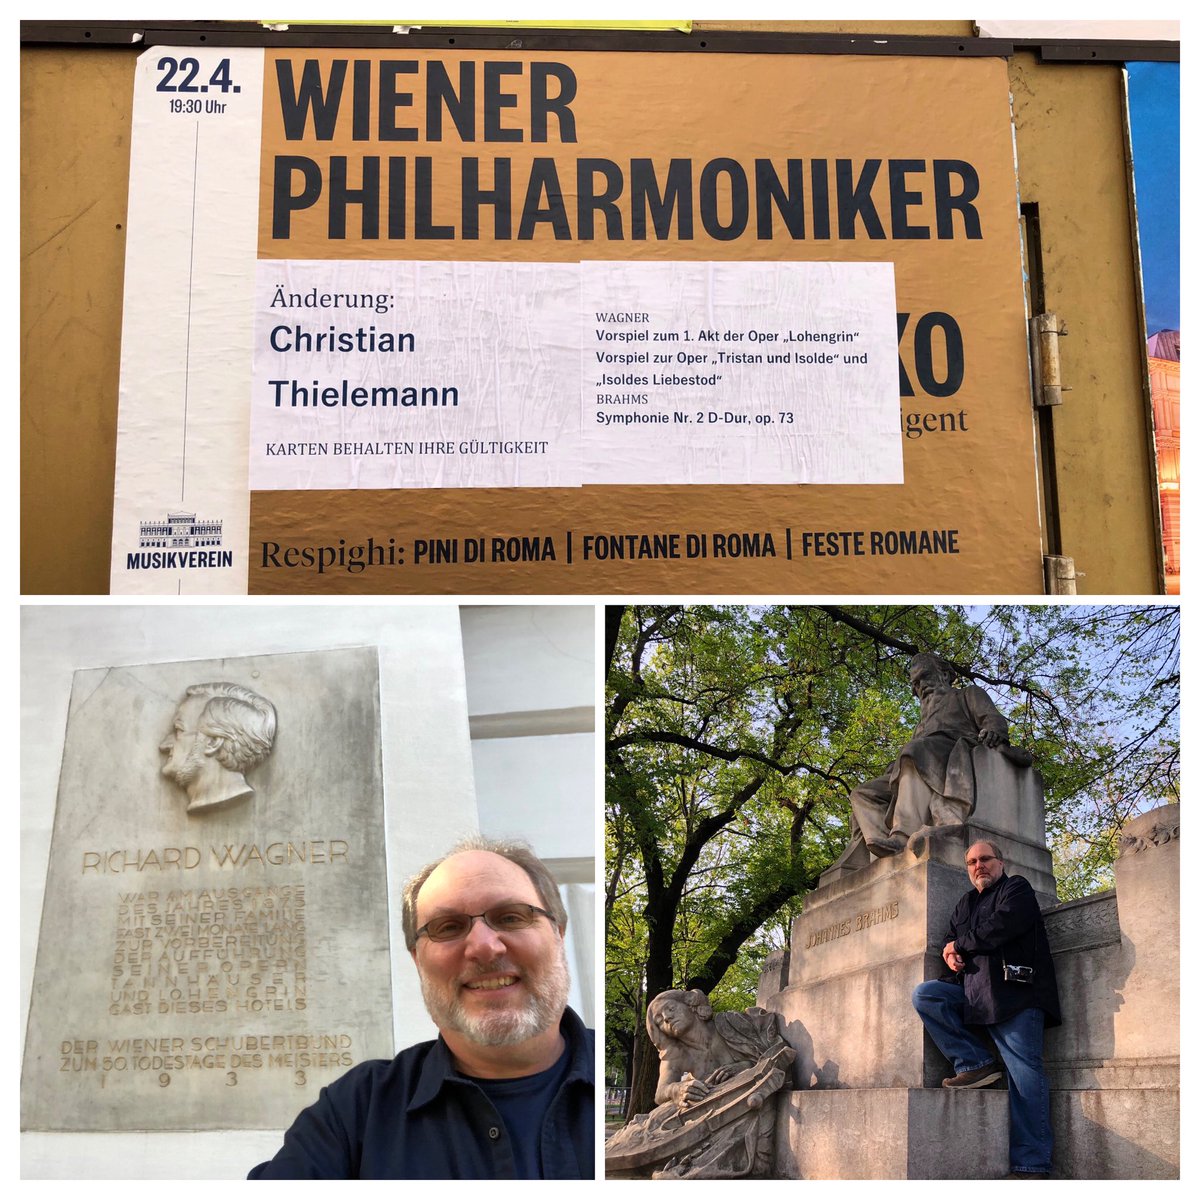 Last minute change to the #ViennaPhilharmonic program, and #RichardWagner and #JohannesBrahms were pleased, as was I.